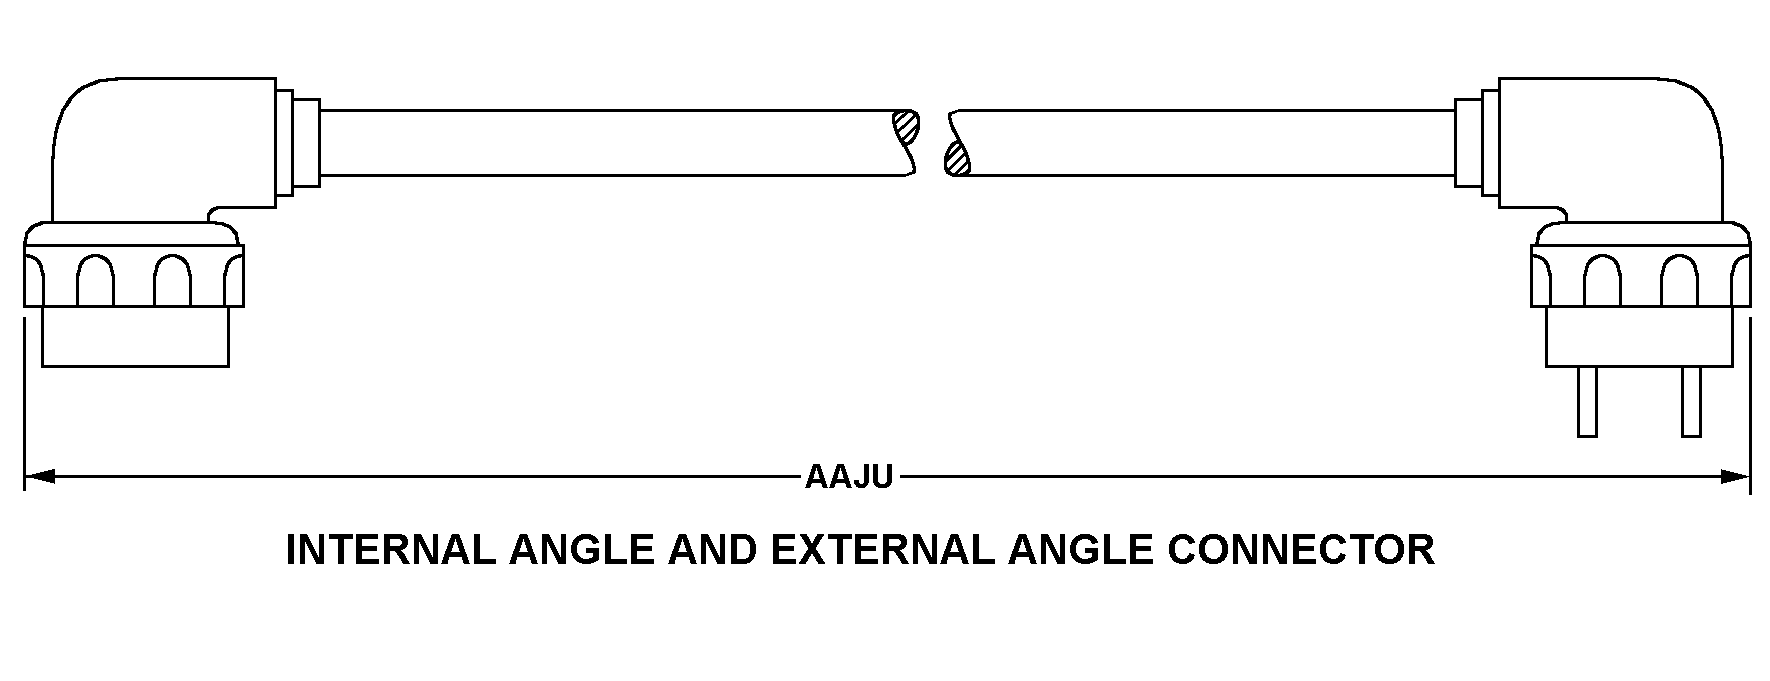 INTERNAL ANGLE AND EXTERNAL ANGLE CONNECTOR style nsn 6150-01-080-0878